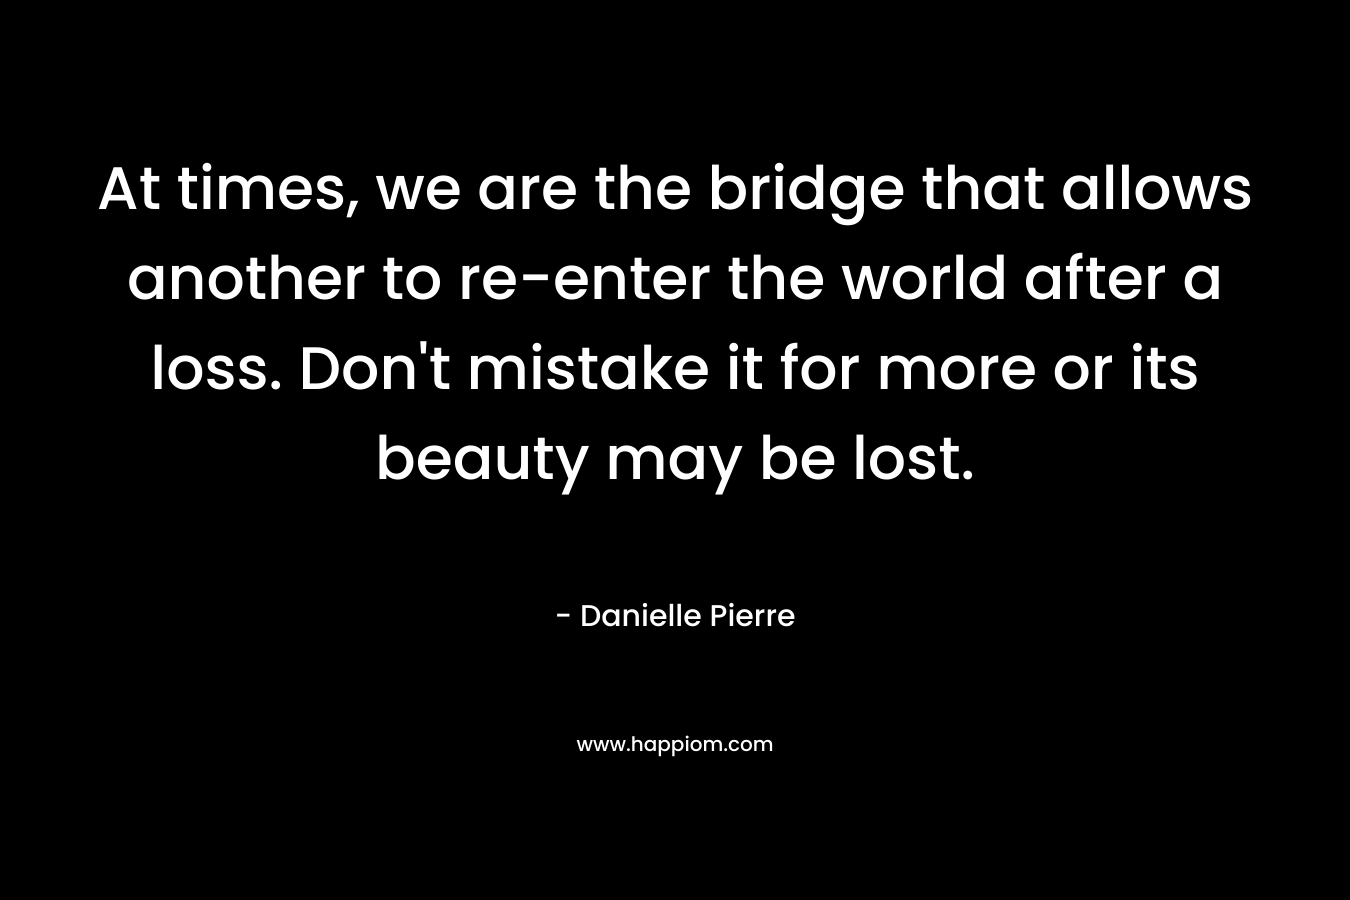 At times, we are the bridge that allows another to re-enter the world after a loss. Don't mistake it for more or its beauty may be lost.